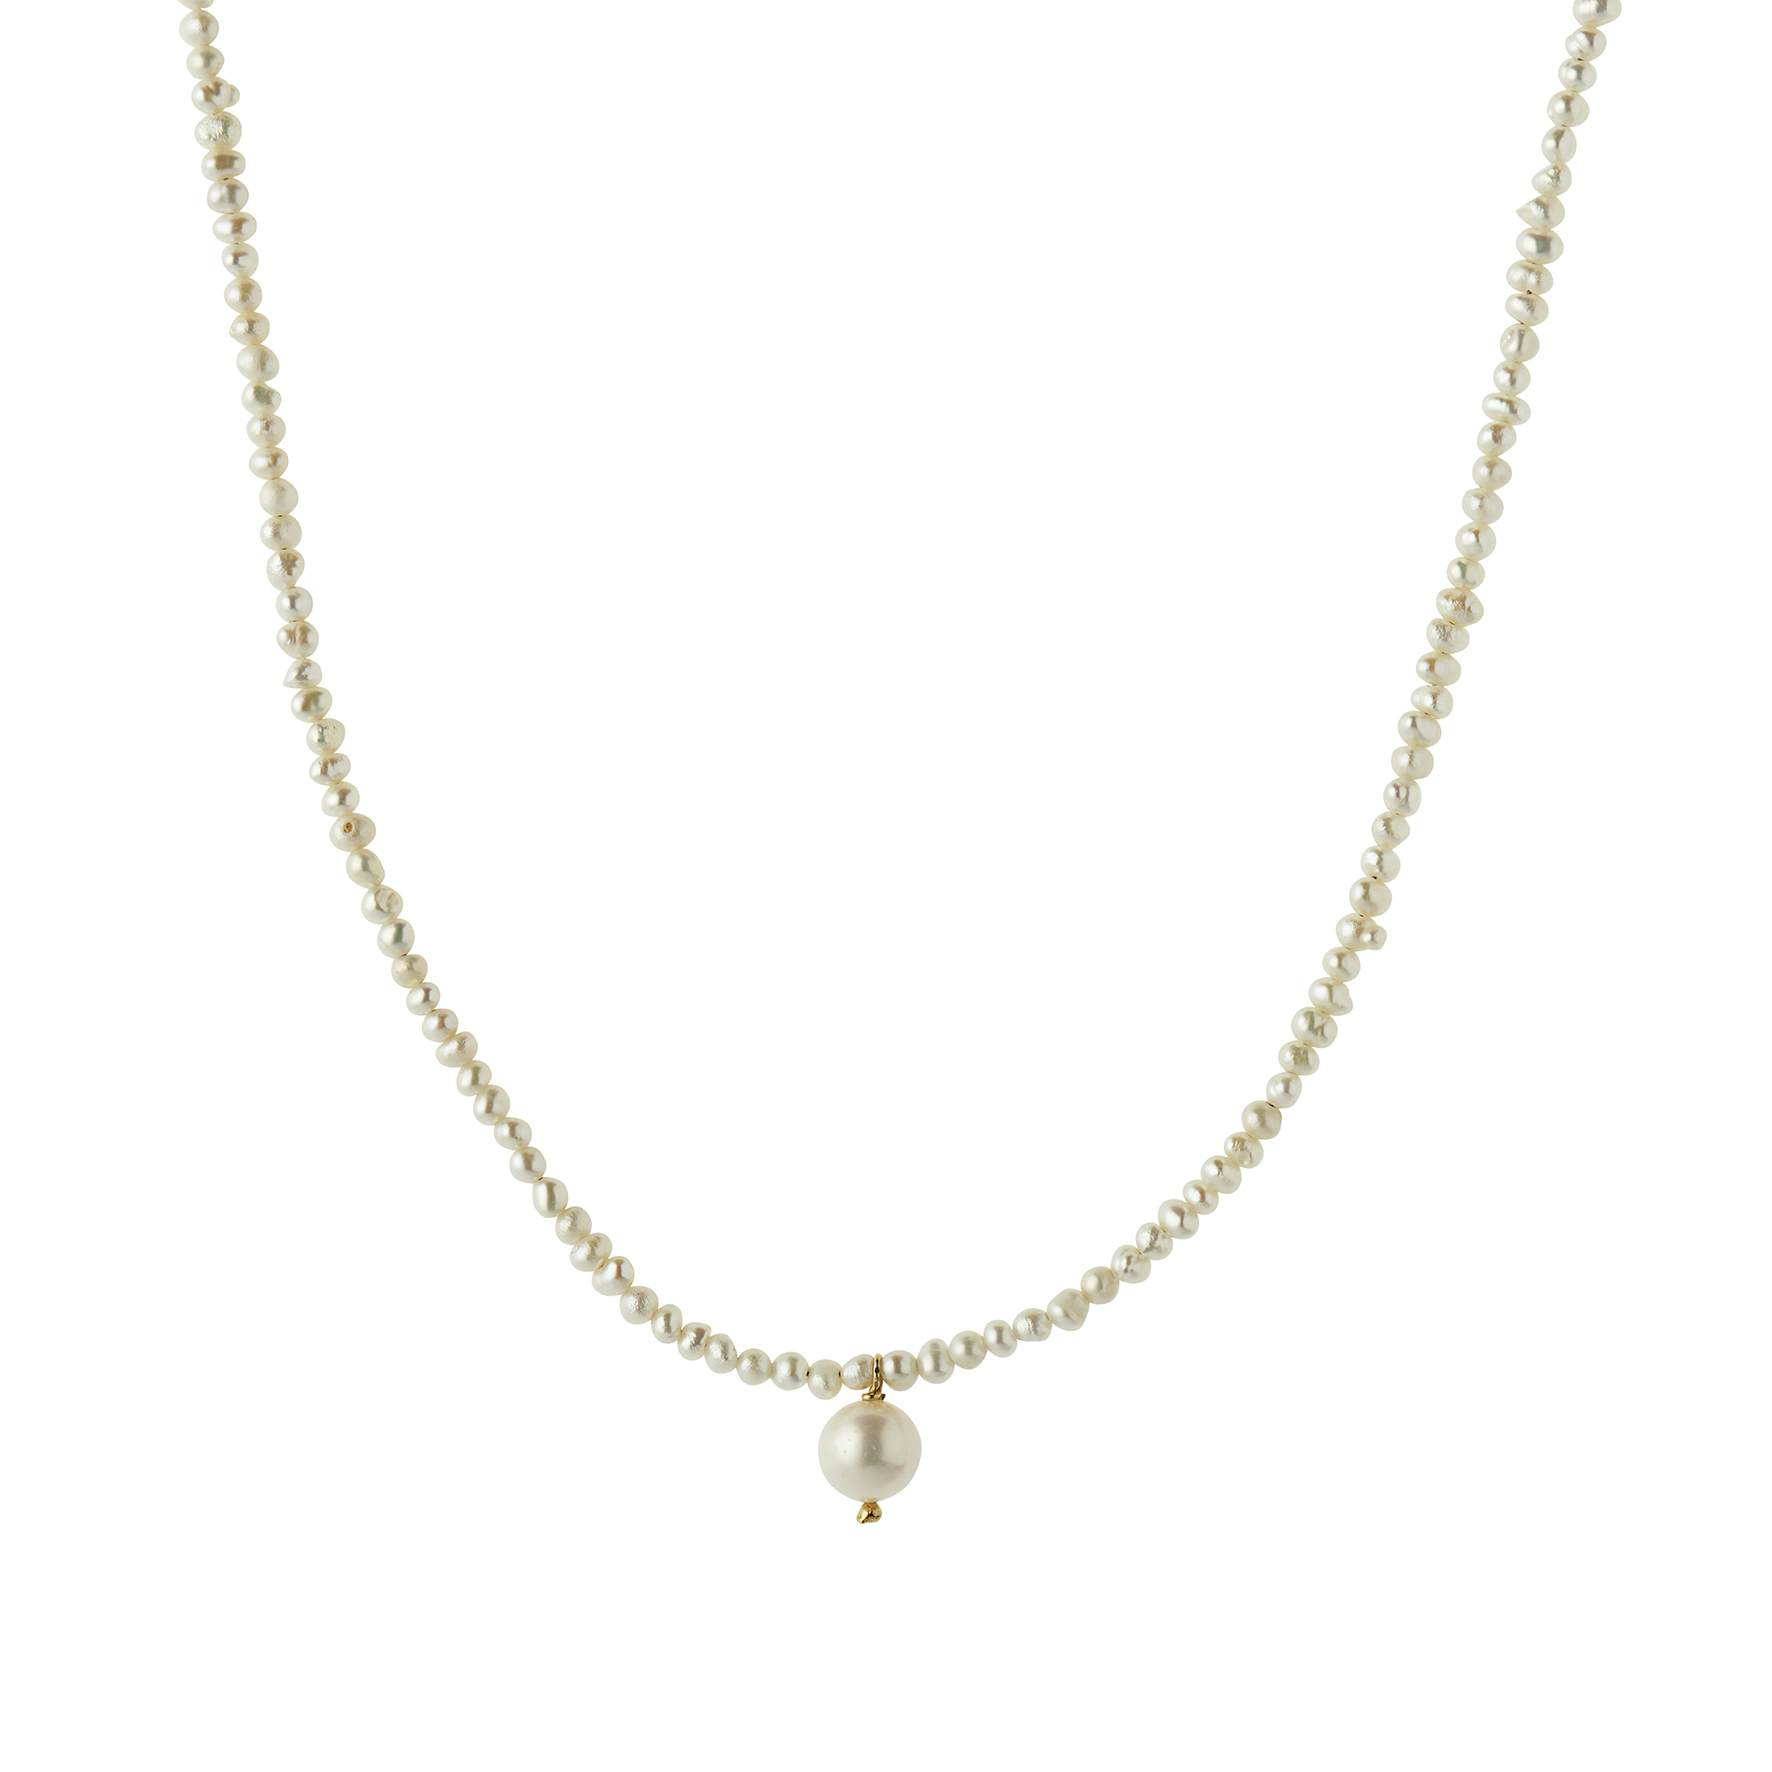 Heavenly Pearl Dream Necklace Classy from STINE A Jewelry in Goldplated-Silver Sterling 925